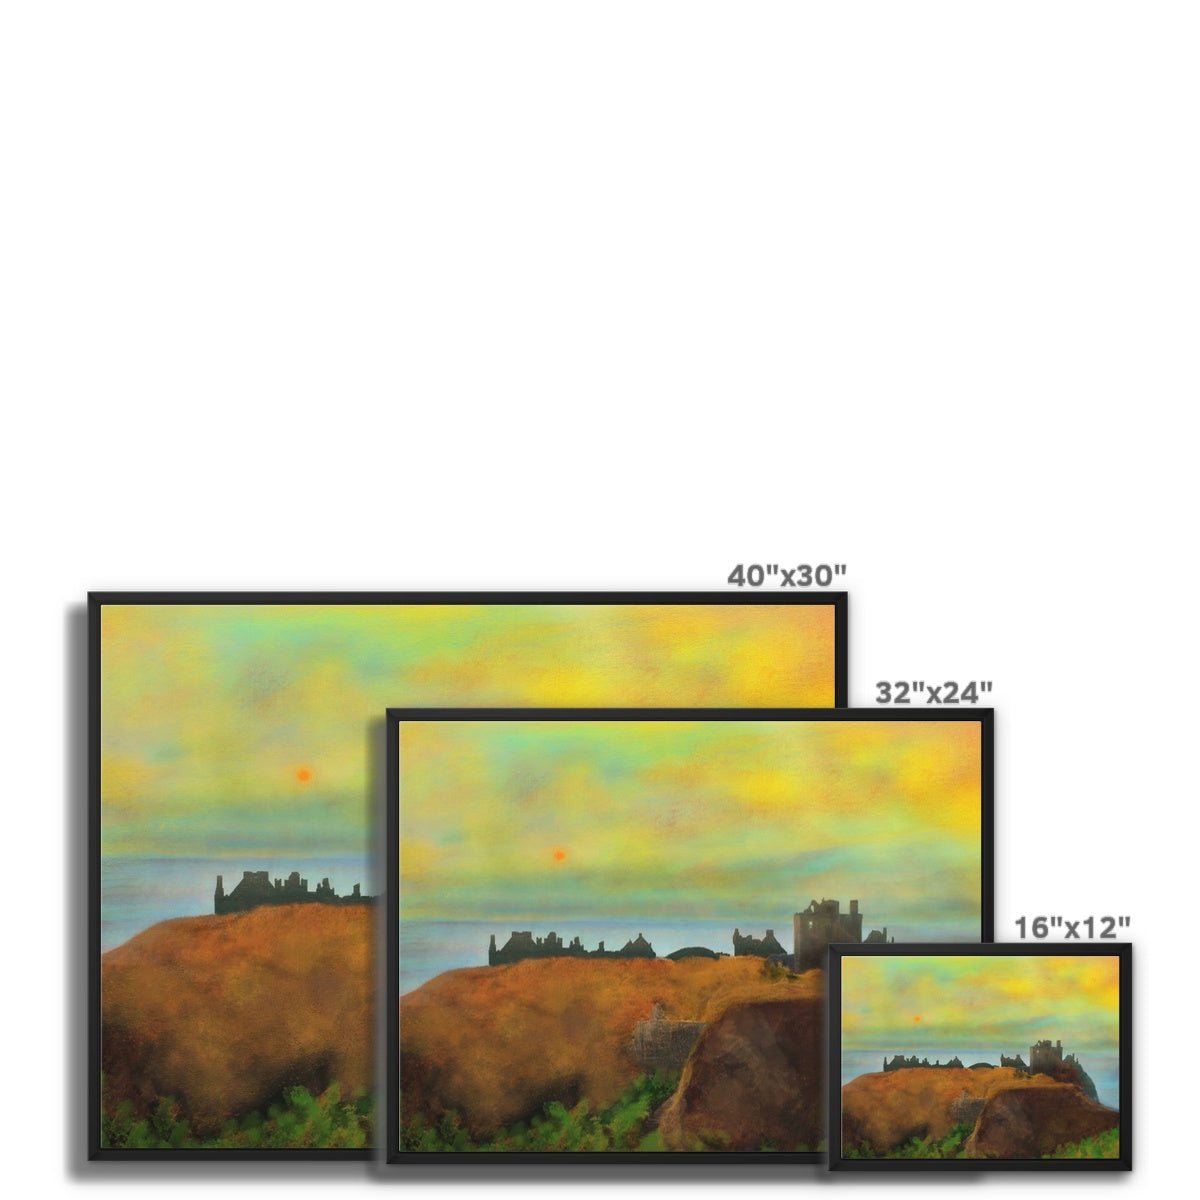 Dunnottar Castle Dusk Painting | Framed Canvas From Scotland-Floating Framed Canvas Prints-Historic & Iconic Scotland Art Gallery-Paintings, Prints, Homeware, Art Gifts From Scotland By Scottish Artist Kevin Hunter